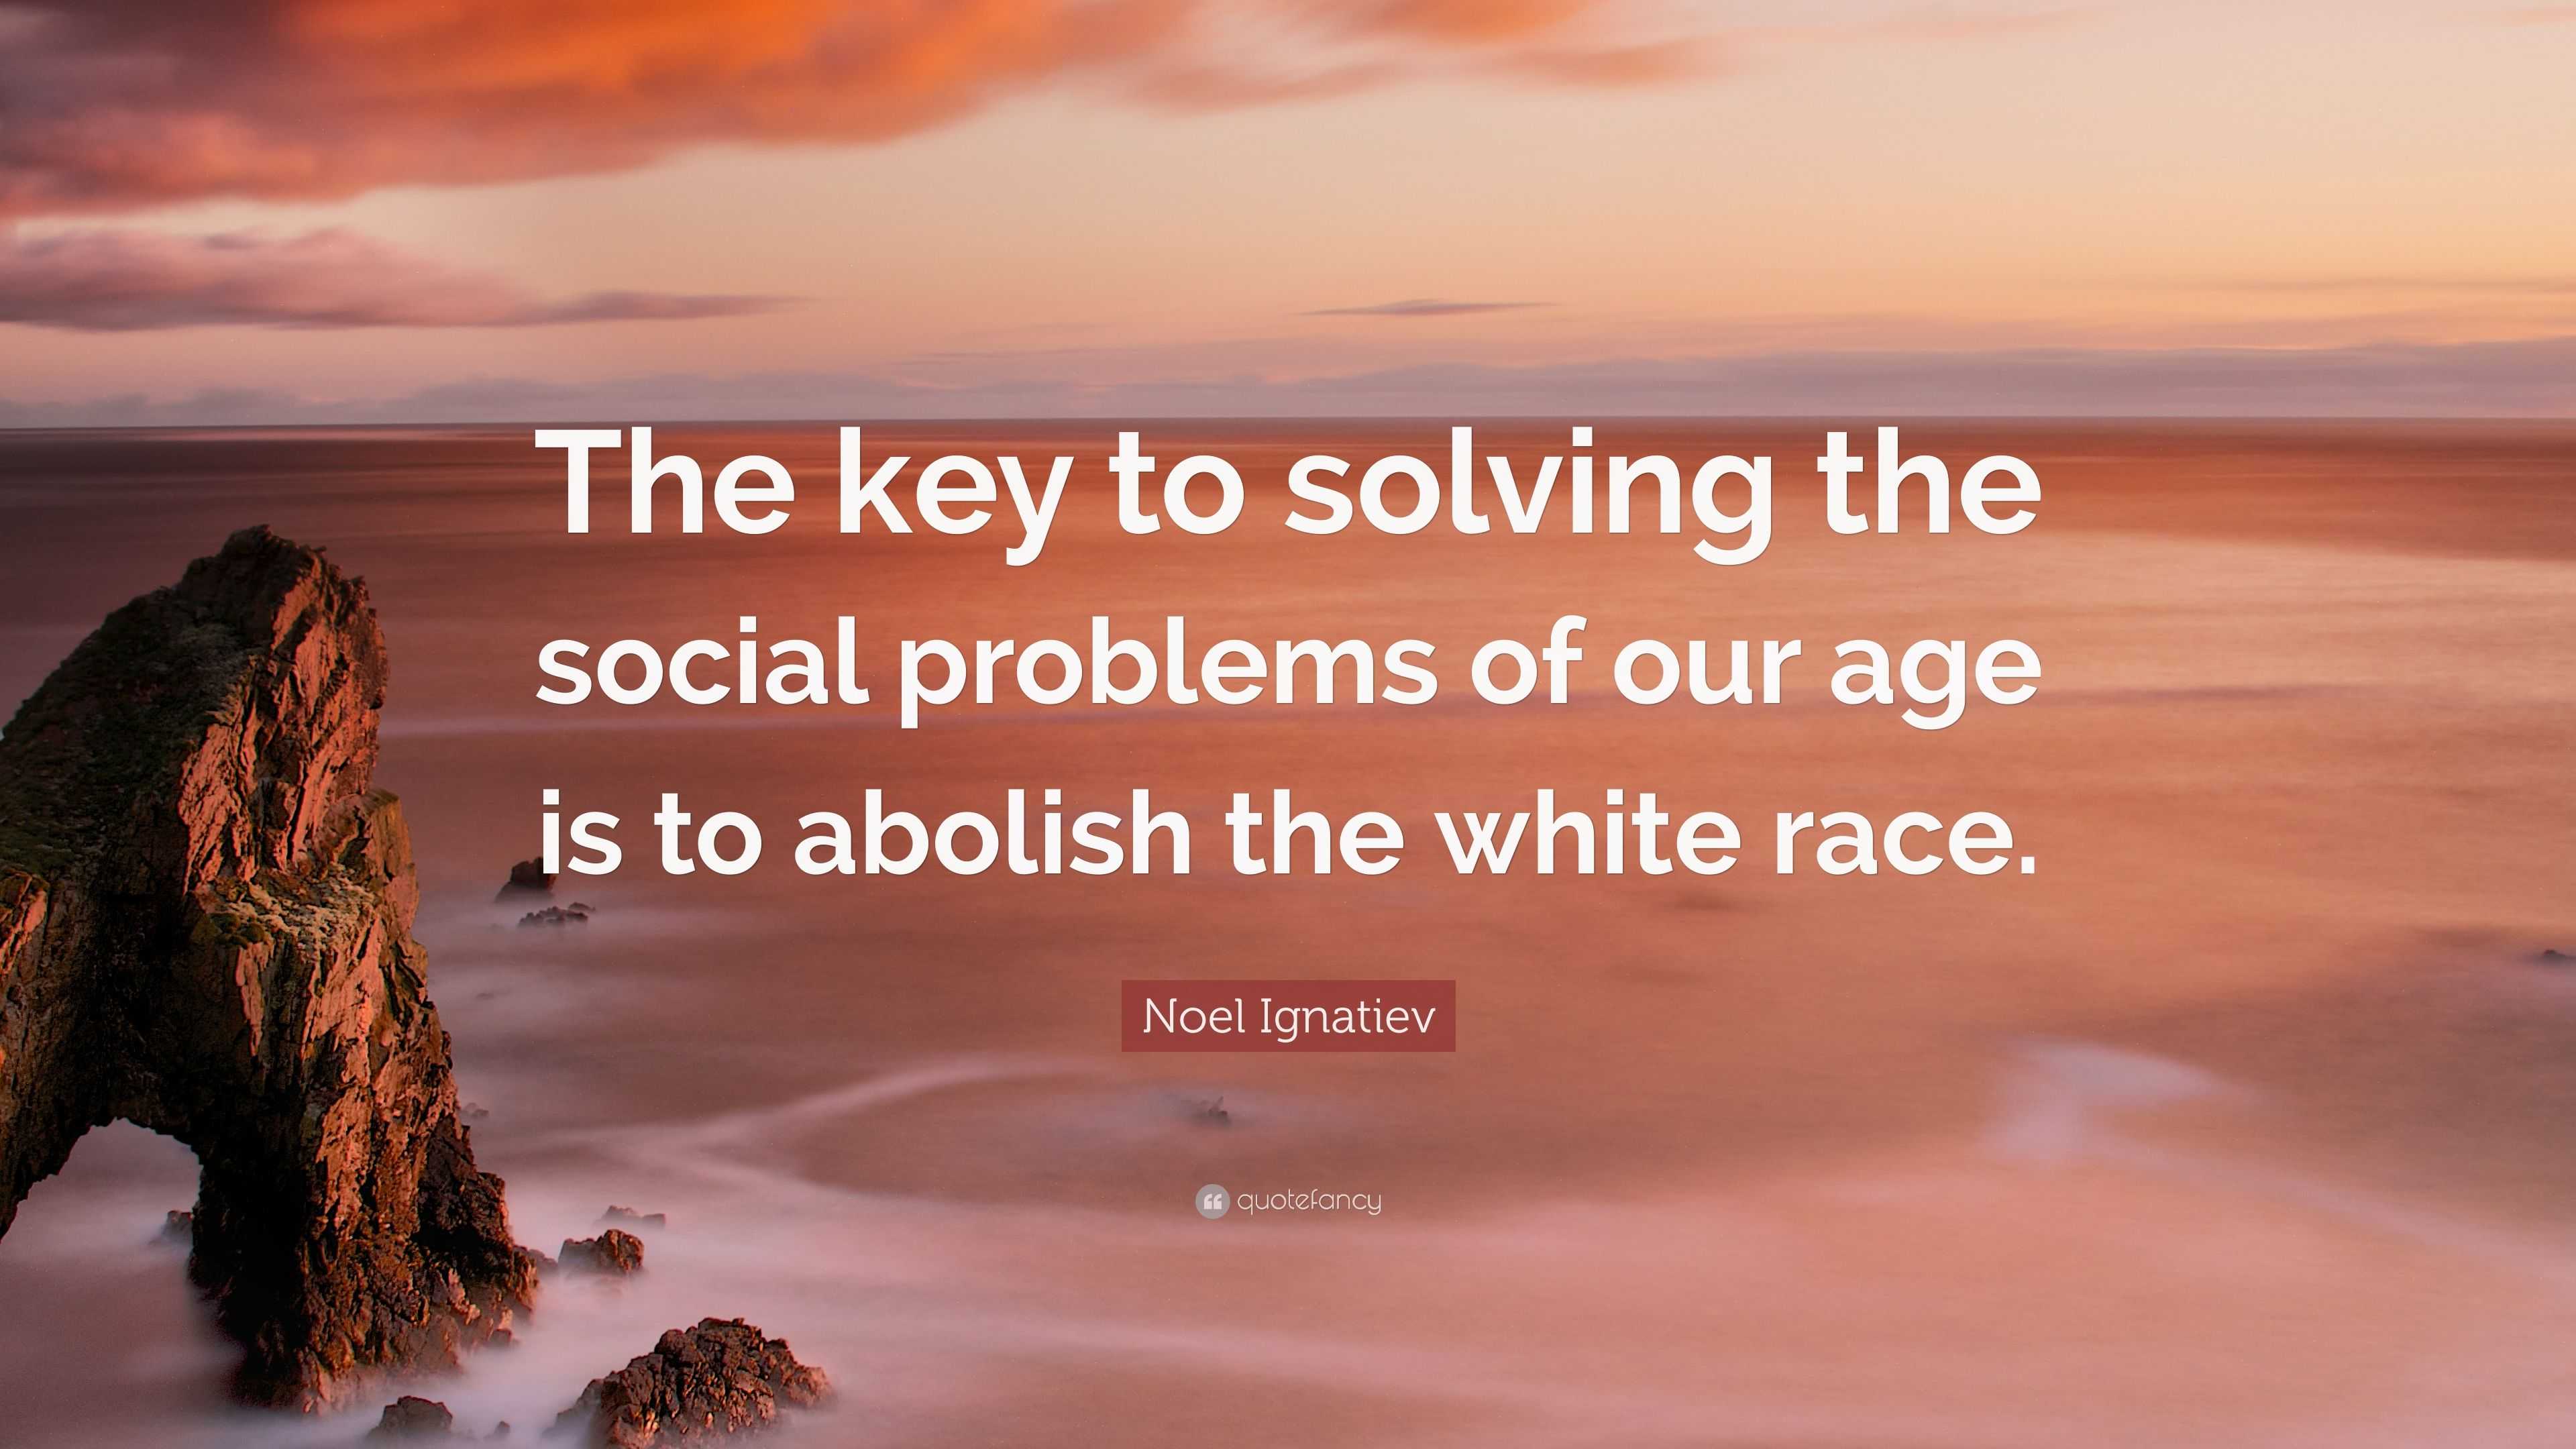 noel-ignatiev-quote-the-key-to-solving-the-social-problems-of-our-age